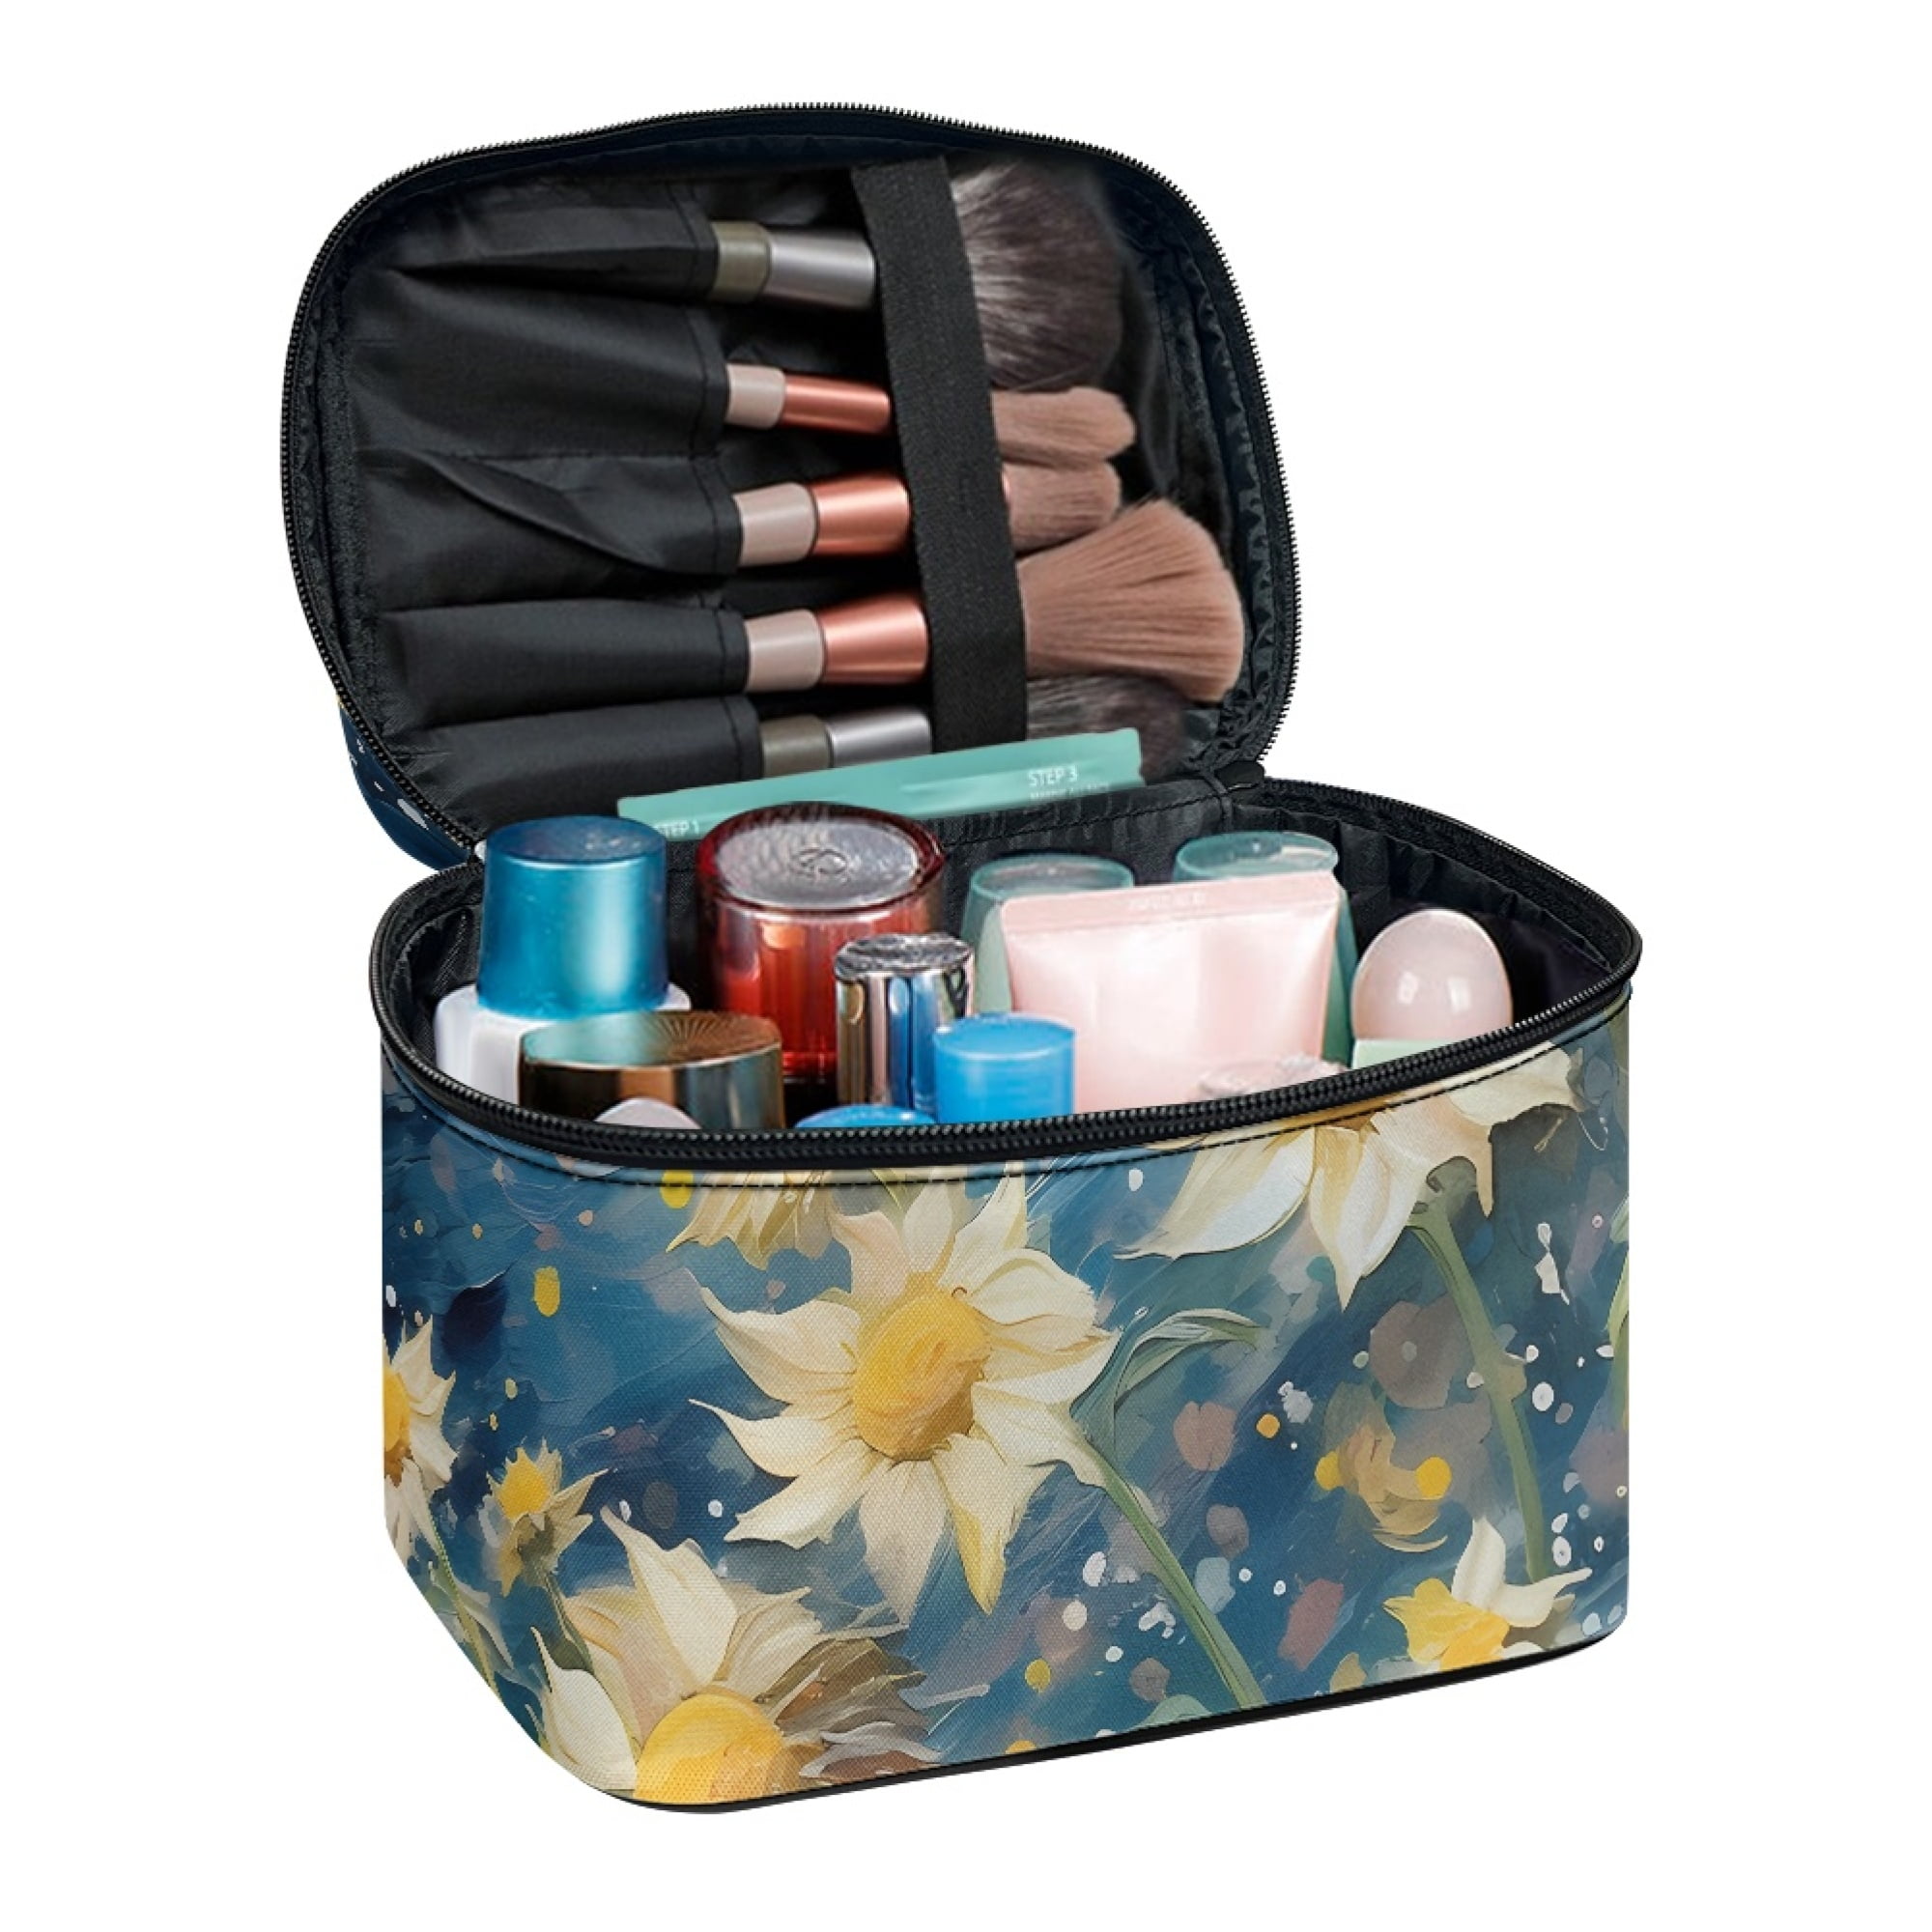 Makeup Bag Case Cosmetic Makeup Organiser Bag with Pouch at Rs 850.00 | Cosmetic  Bags | ID: 2851784054812